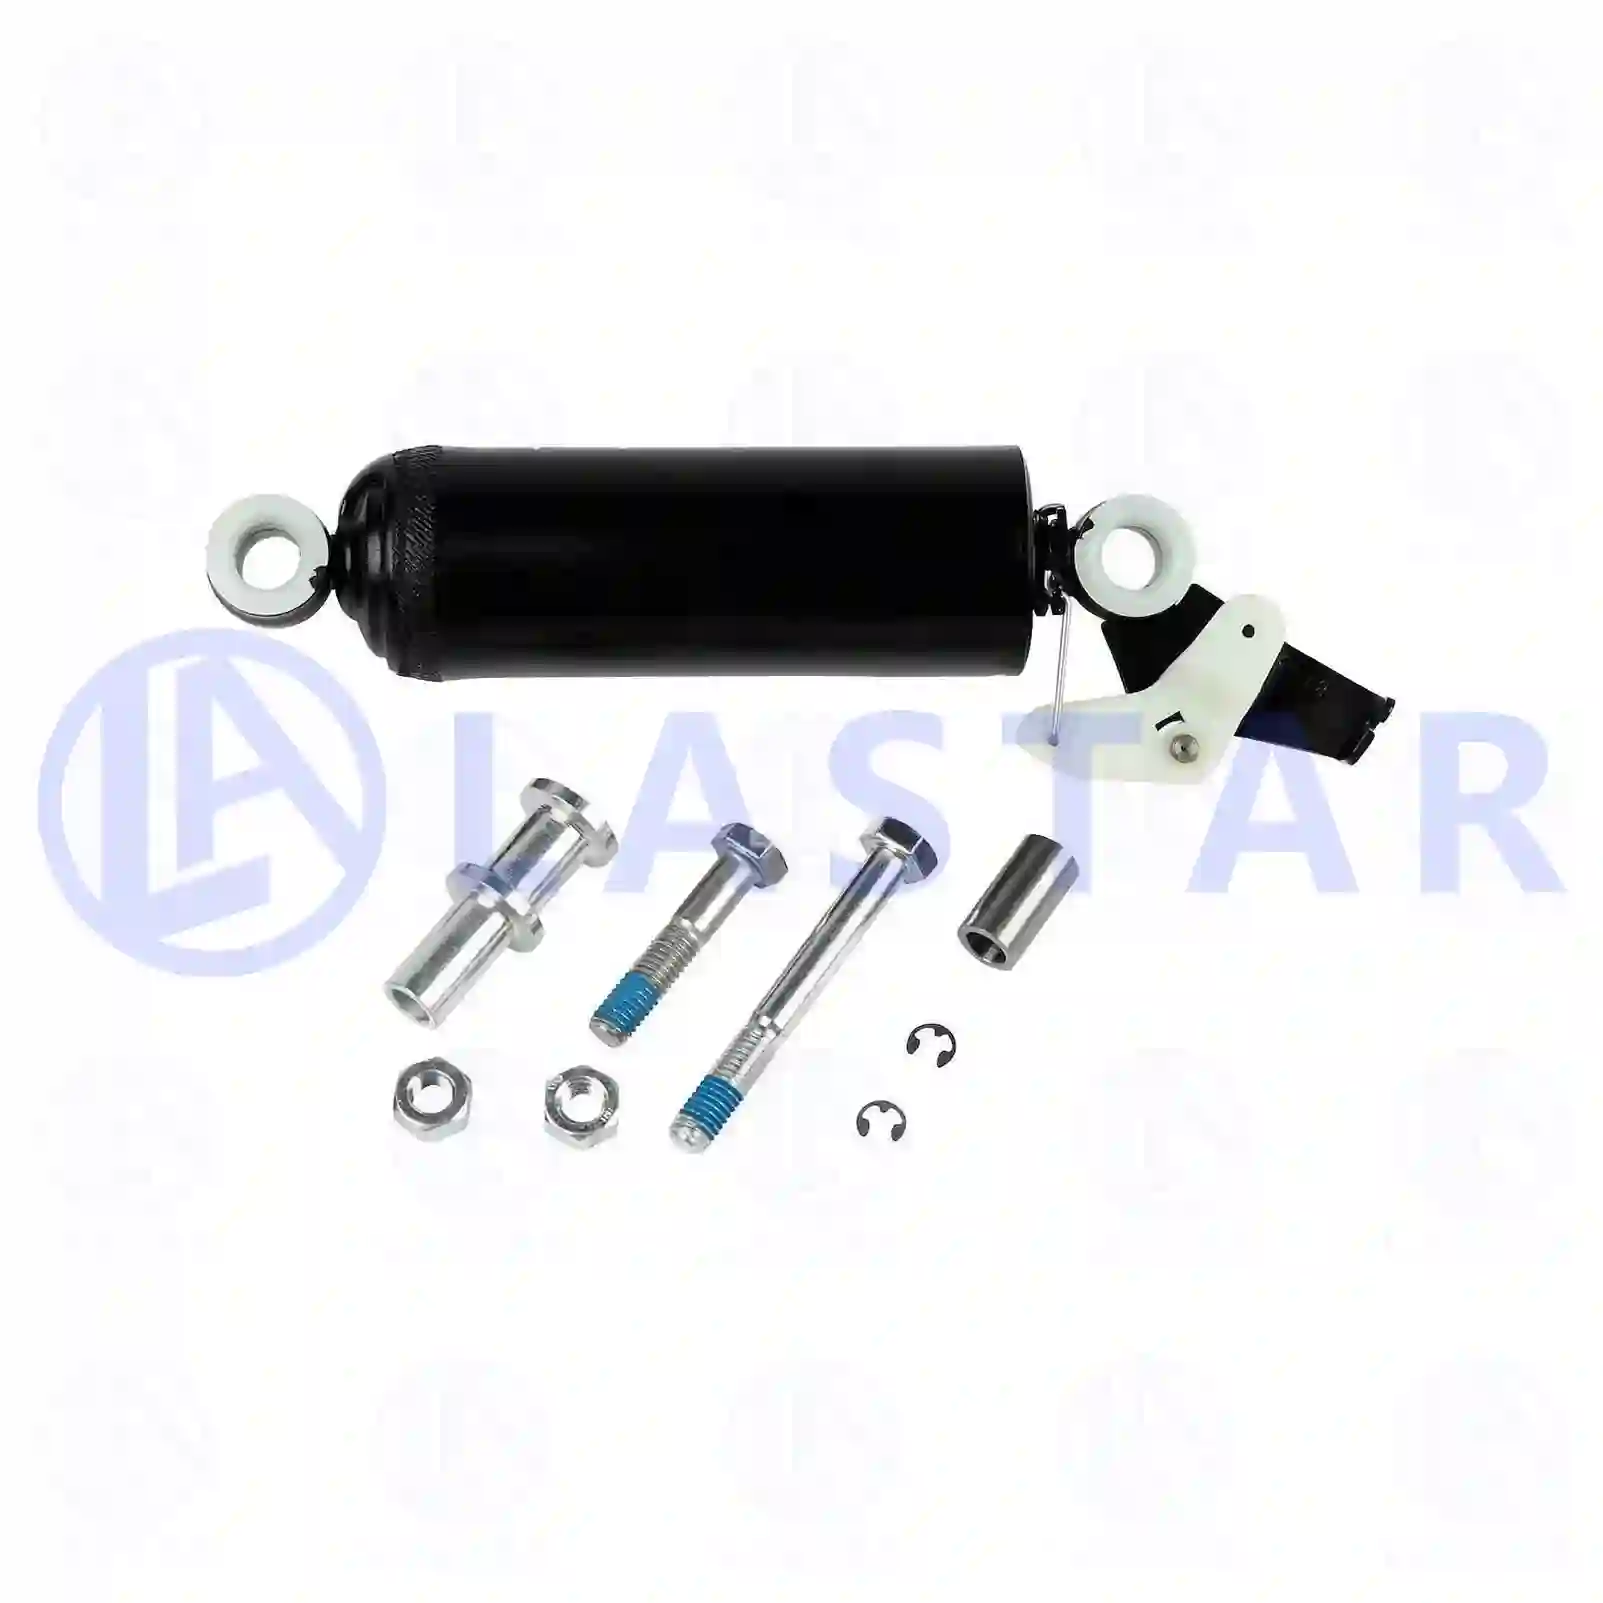 Seat Shock absorber, seat, without accessories, la no: 77734884 ,  oem no:0019191245, 5001857903, 1498862, 2438272, 20443547, ZG41656-0008 Lastar Spare Part | Truck Spare Parts, Auotomotive Spare Parts